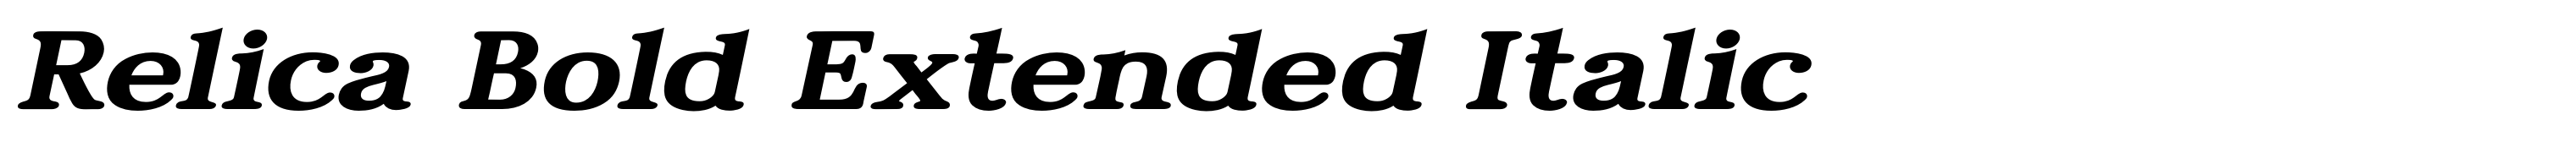 Relica Bold Extended Italic